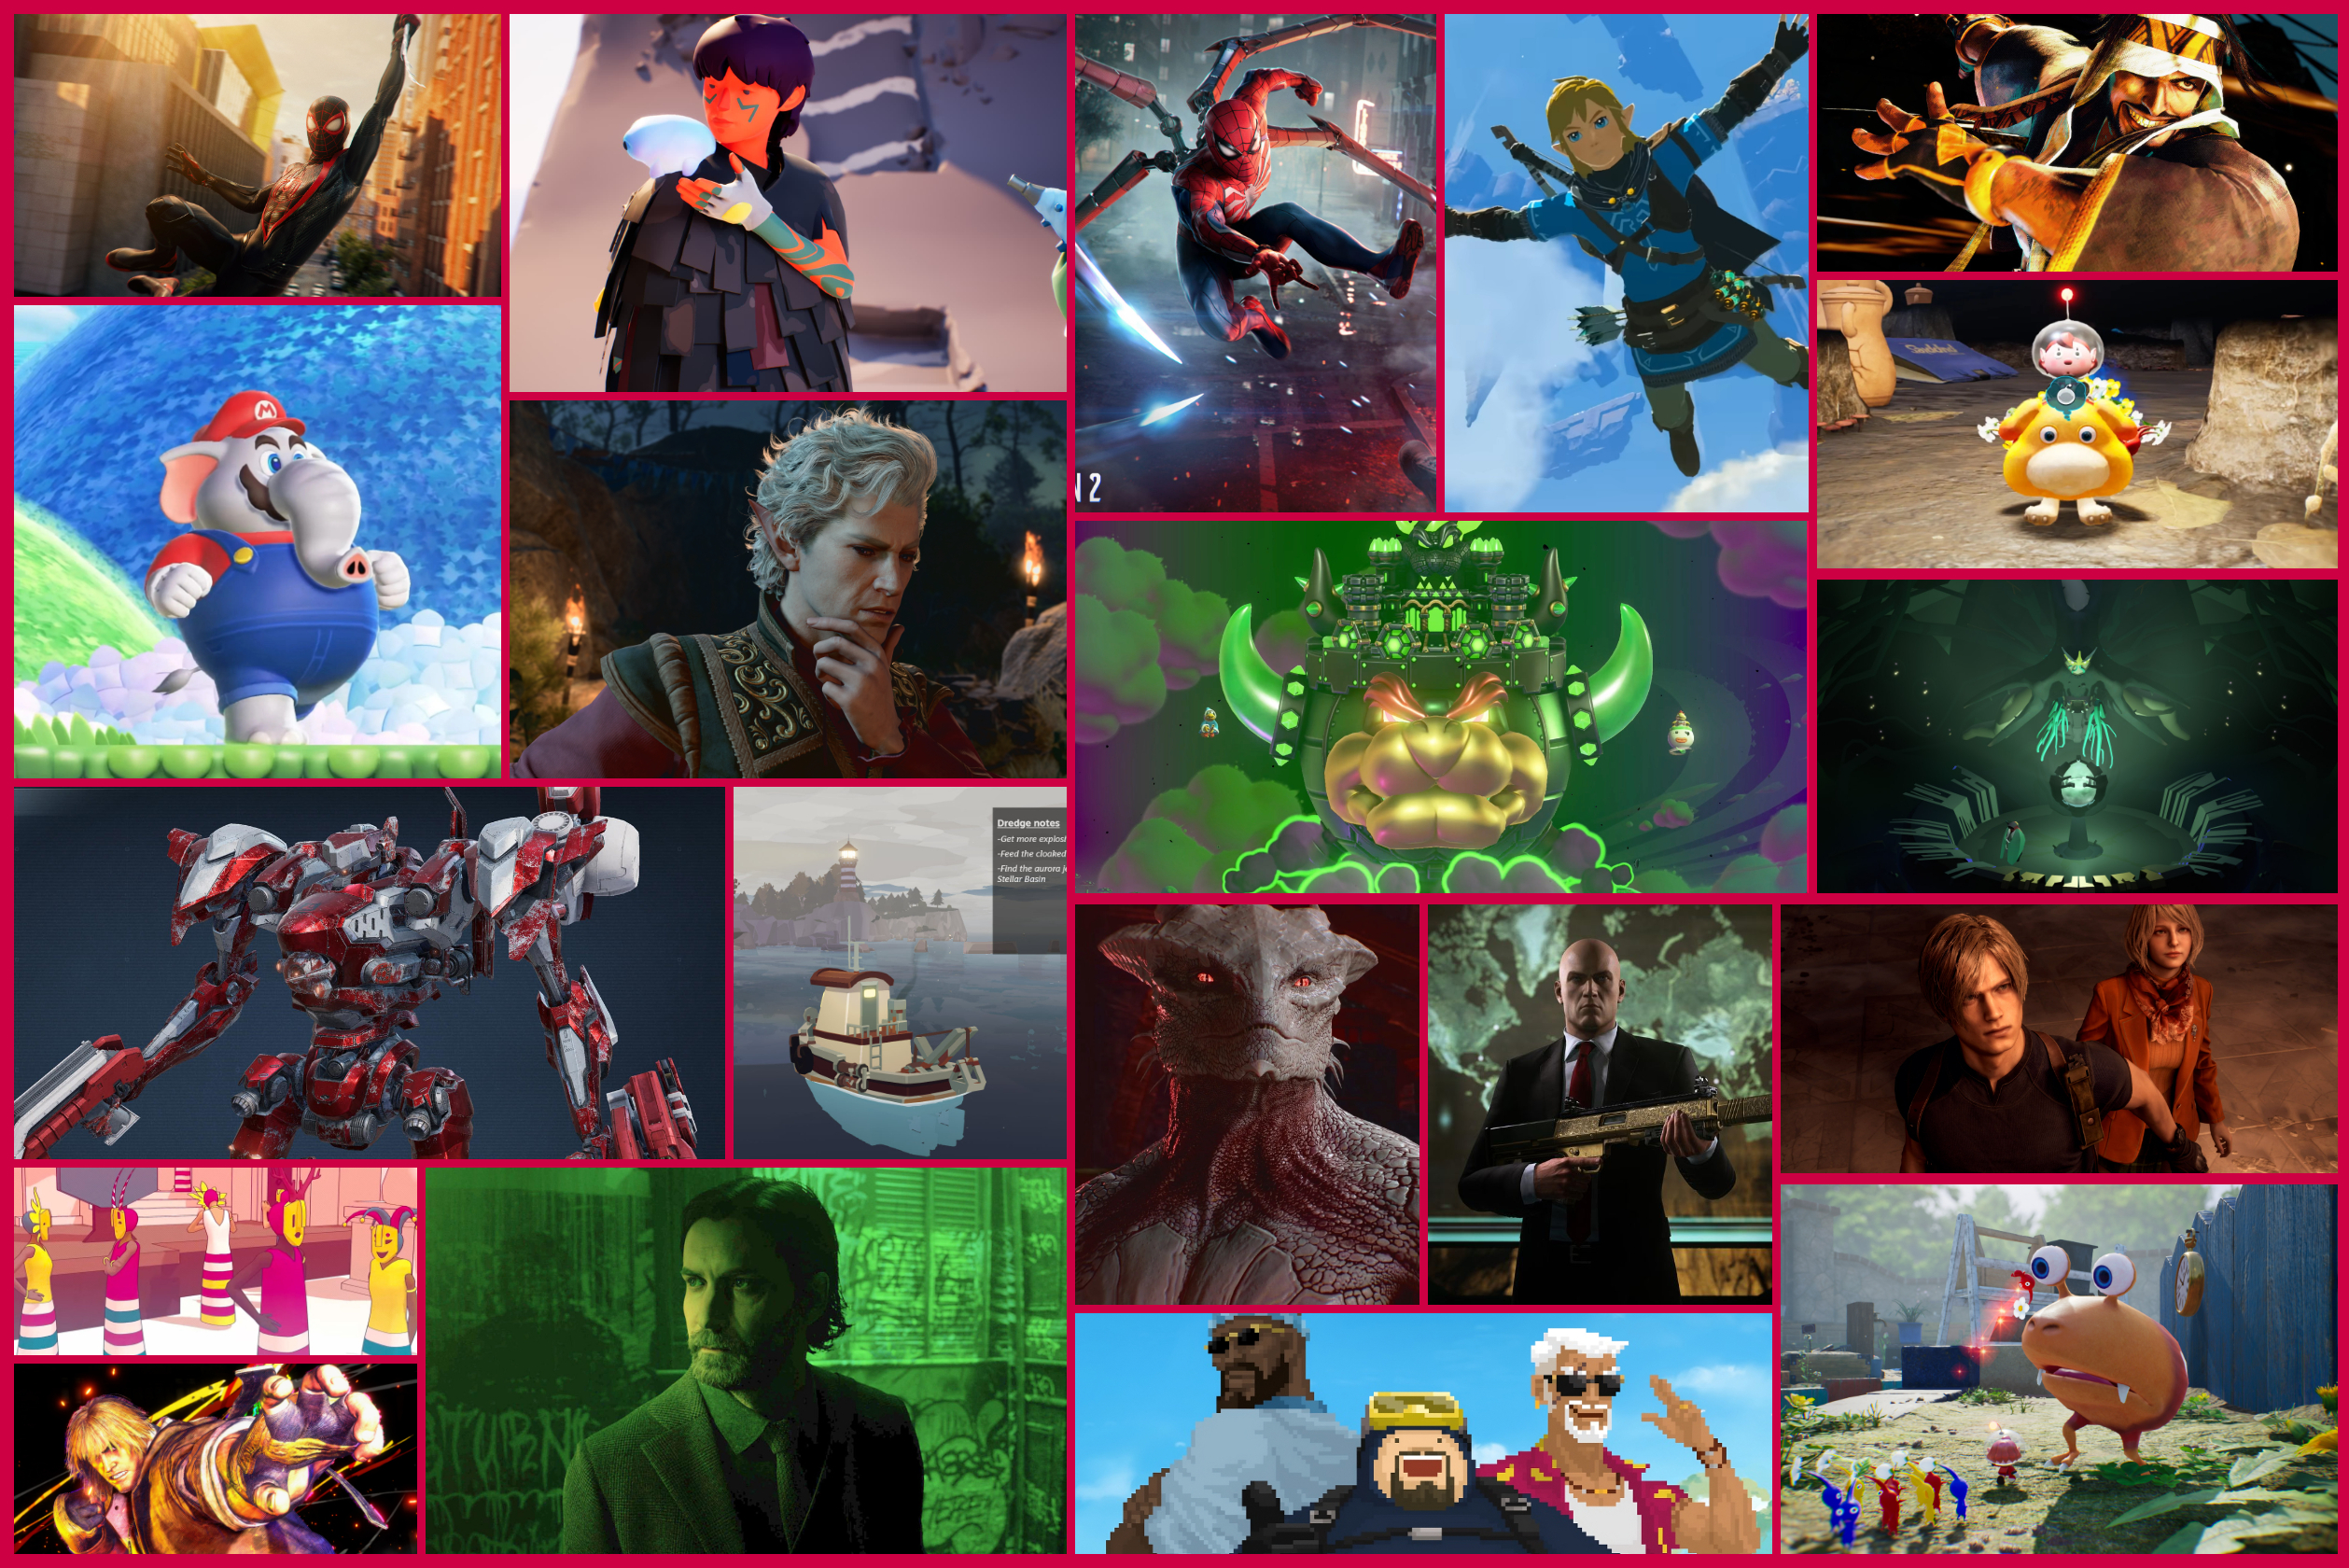 A collage showing some of Polygon’s favorite video games of 2023, including characters from Alan Wake 2, The Legend of Zelda: tears of the Kingdom, Baldur’s Gate 3, and more